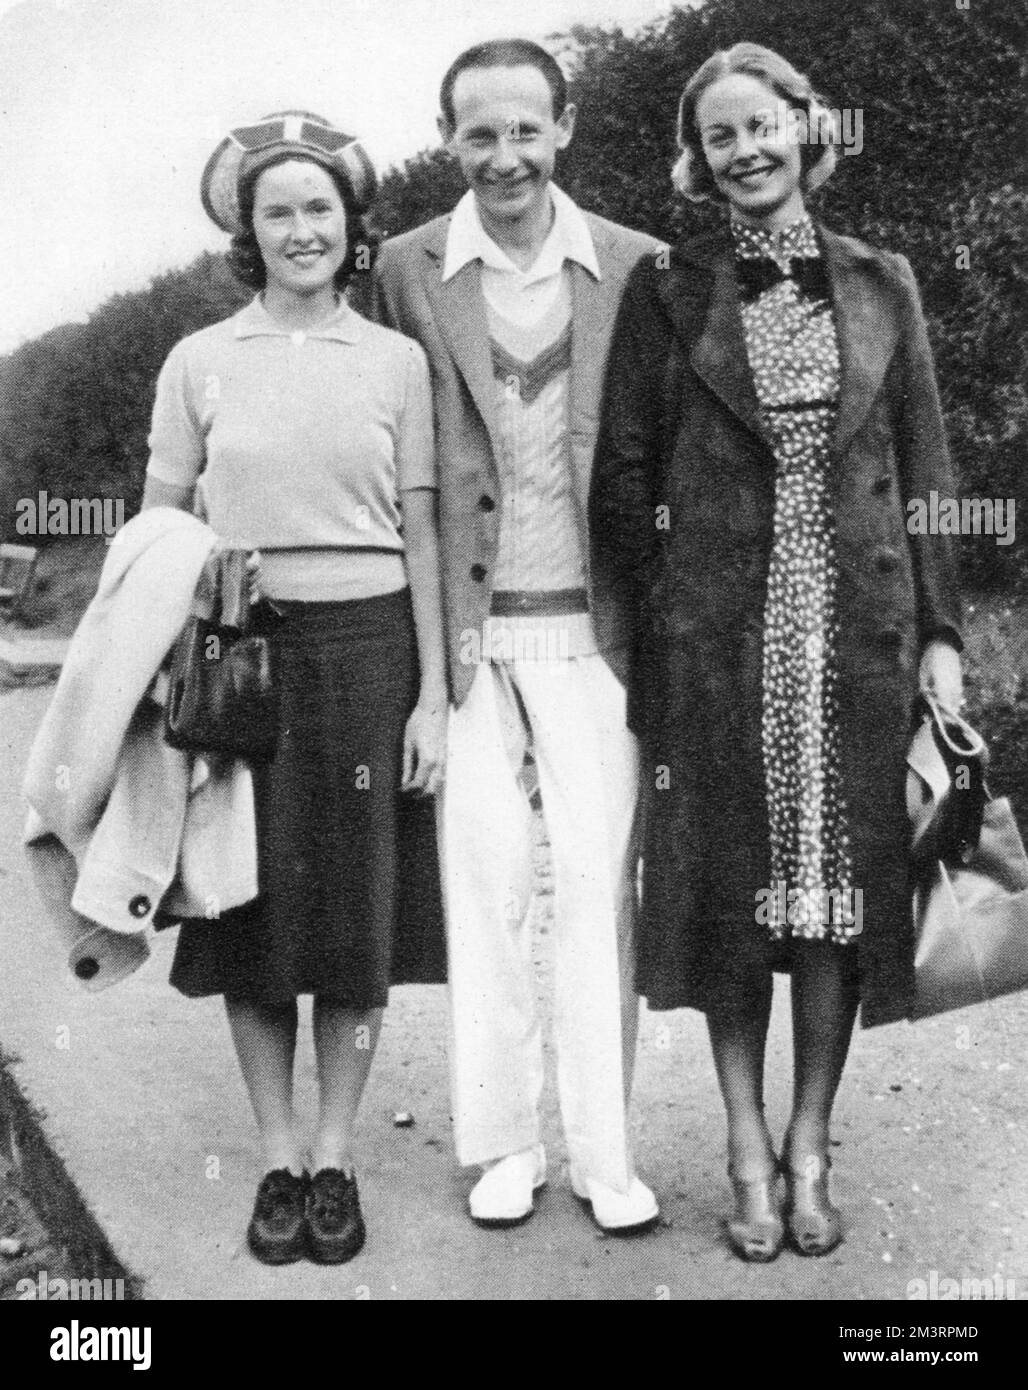 Mrs Sarah Palfrey Fabyan, Jean Borotra and Alice Marble pictured at Roehampton Club in 1938.  Alice Marble (1913 - 1990), American tennis player was the first woman to win both the US Open and Wimbledon singles titles in the same year, as well as the ladies' doubles and mixed doubles. She also pioneered the wearing of shorts for tennis, first in 1932 and in 1950, spoke out supporting the black tennis player, Althea Gibson and encouraging the public to accept black and homosexual tennis players into the game.   Jean Borotra (1898-1994), was a French tennis player known as the 'Bounding Basque Stock Photo